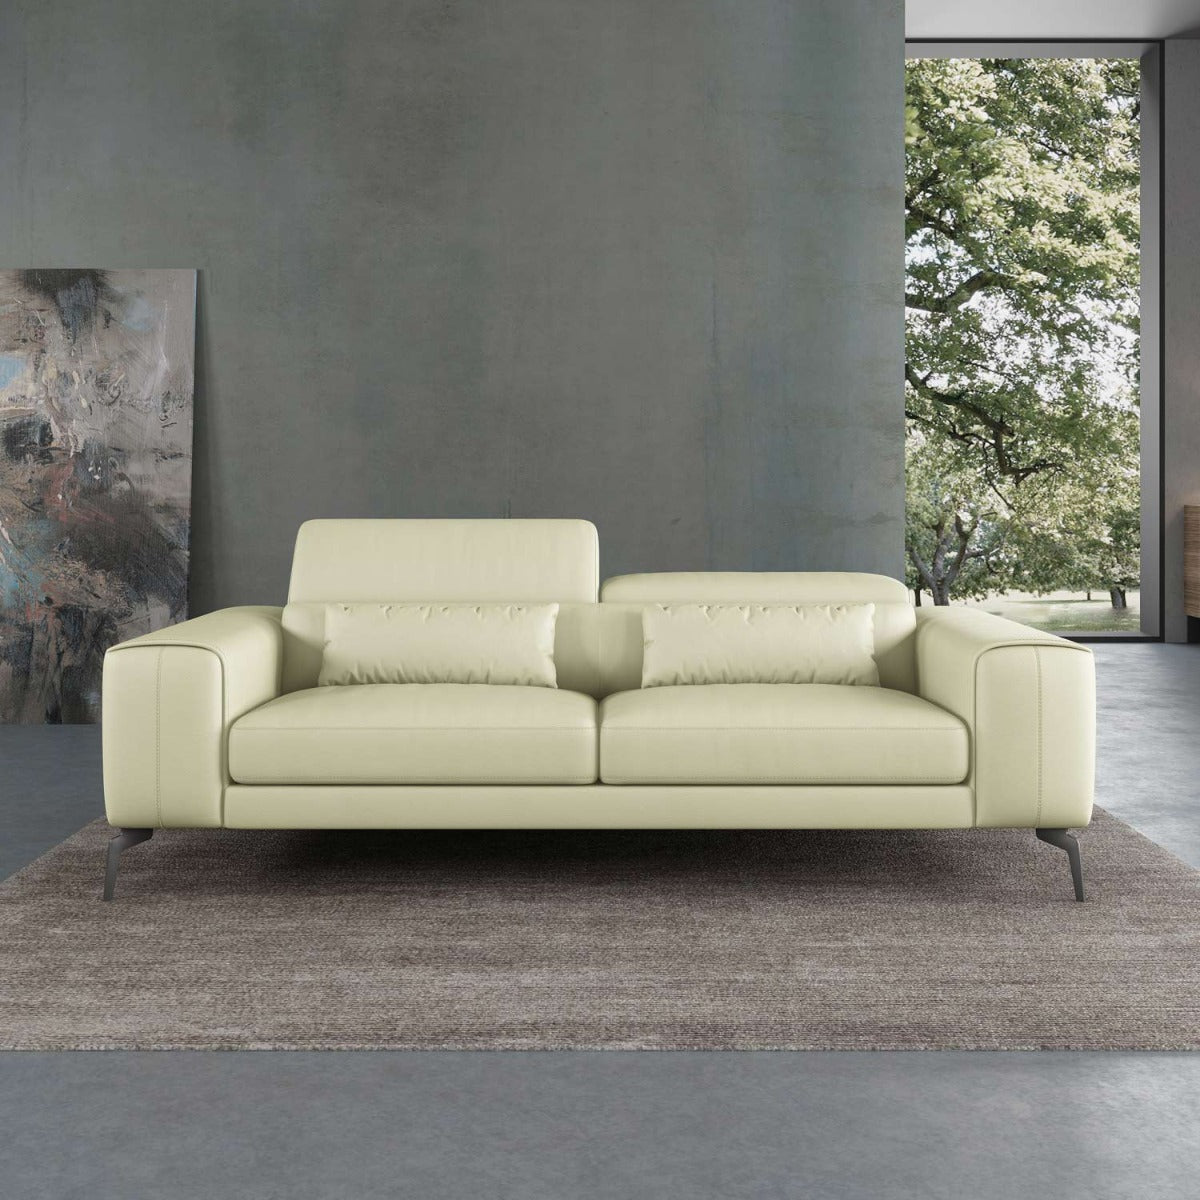 European Furniture - Cavour Sofa in Off Whte - 12552-S - New Star Living